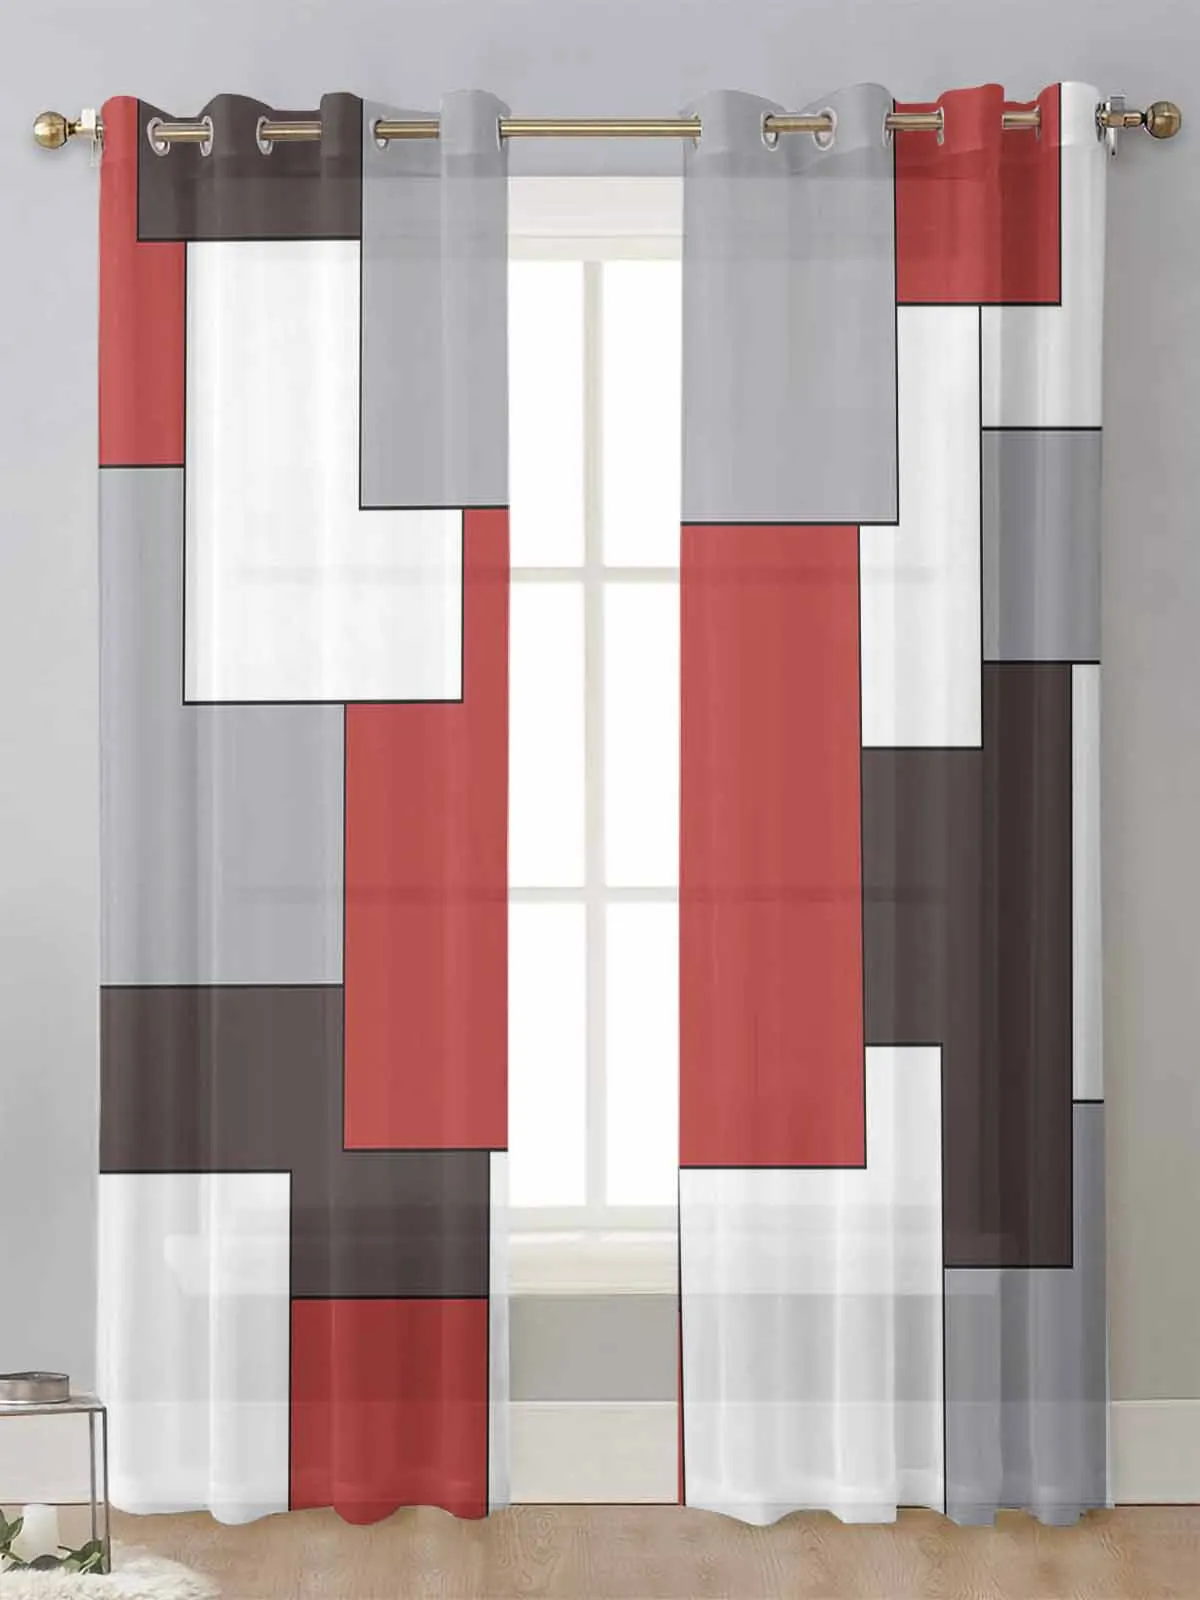 

Mid Century Abstract Geometric Classic Red Sheer Curtains For Living Room Window Voile Tulle Curtain Cortinas Drapes Home Decor